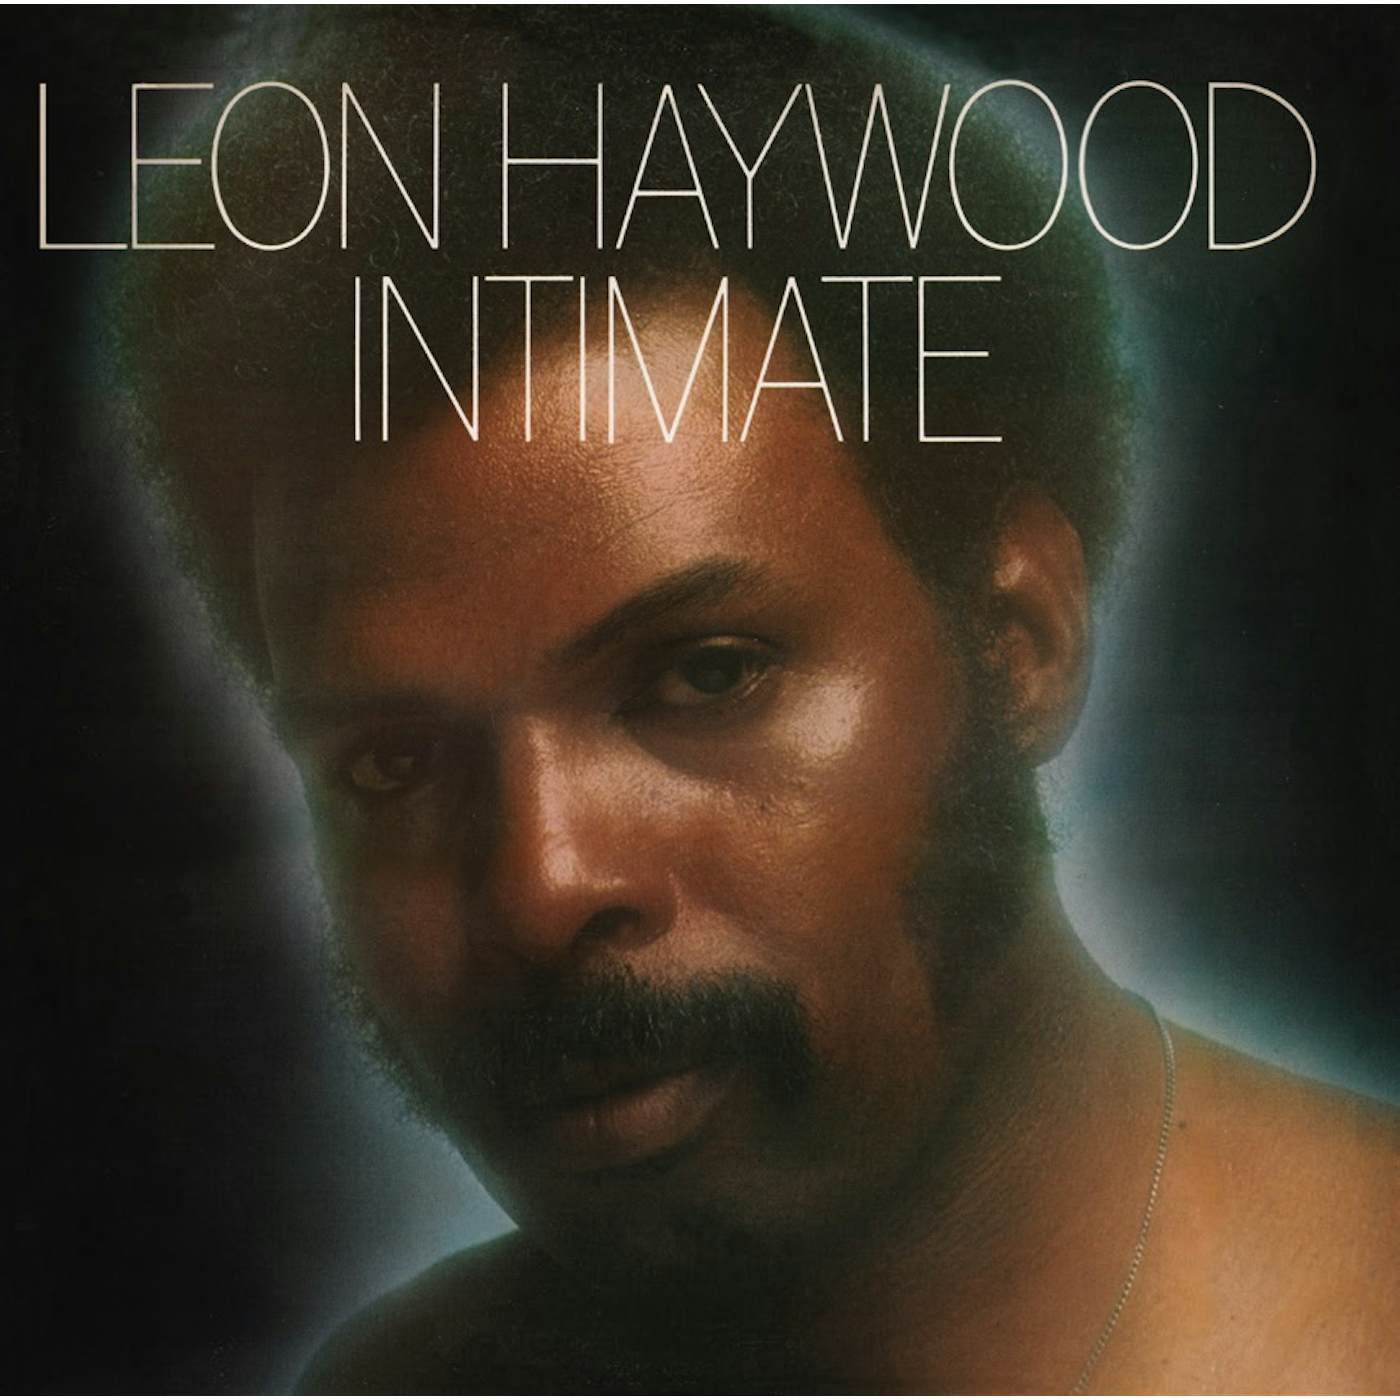 Leon Haywood INTIMATE (EXPANDED EDITION) CD